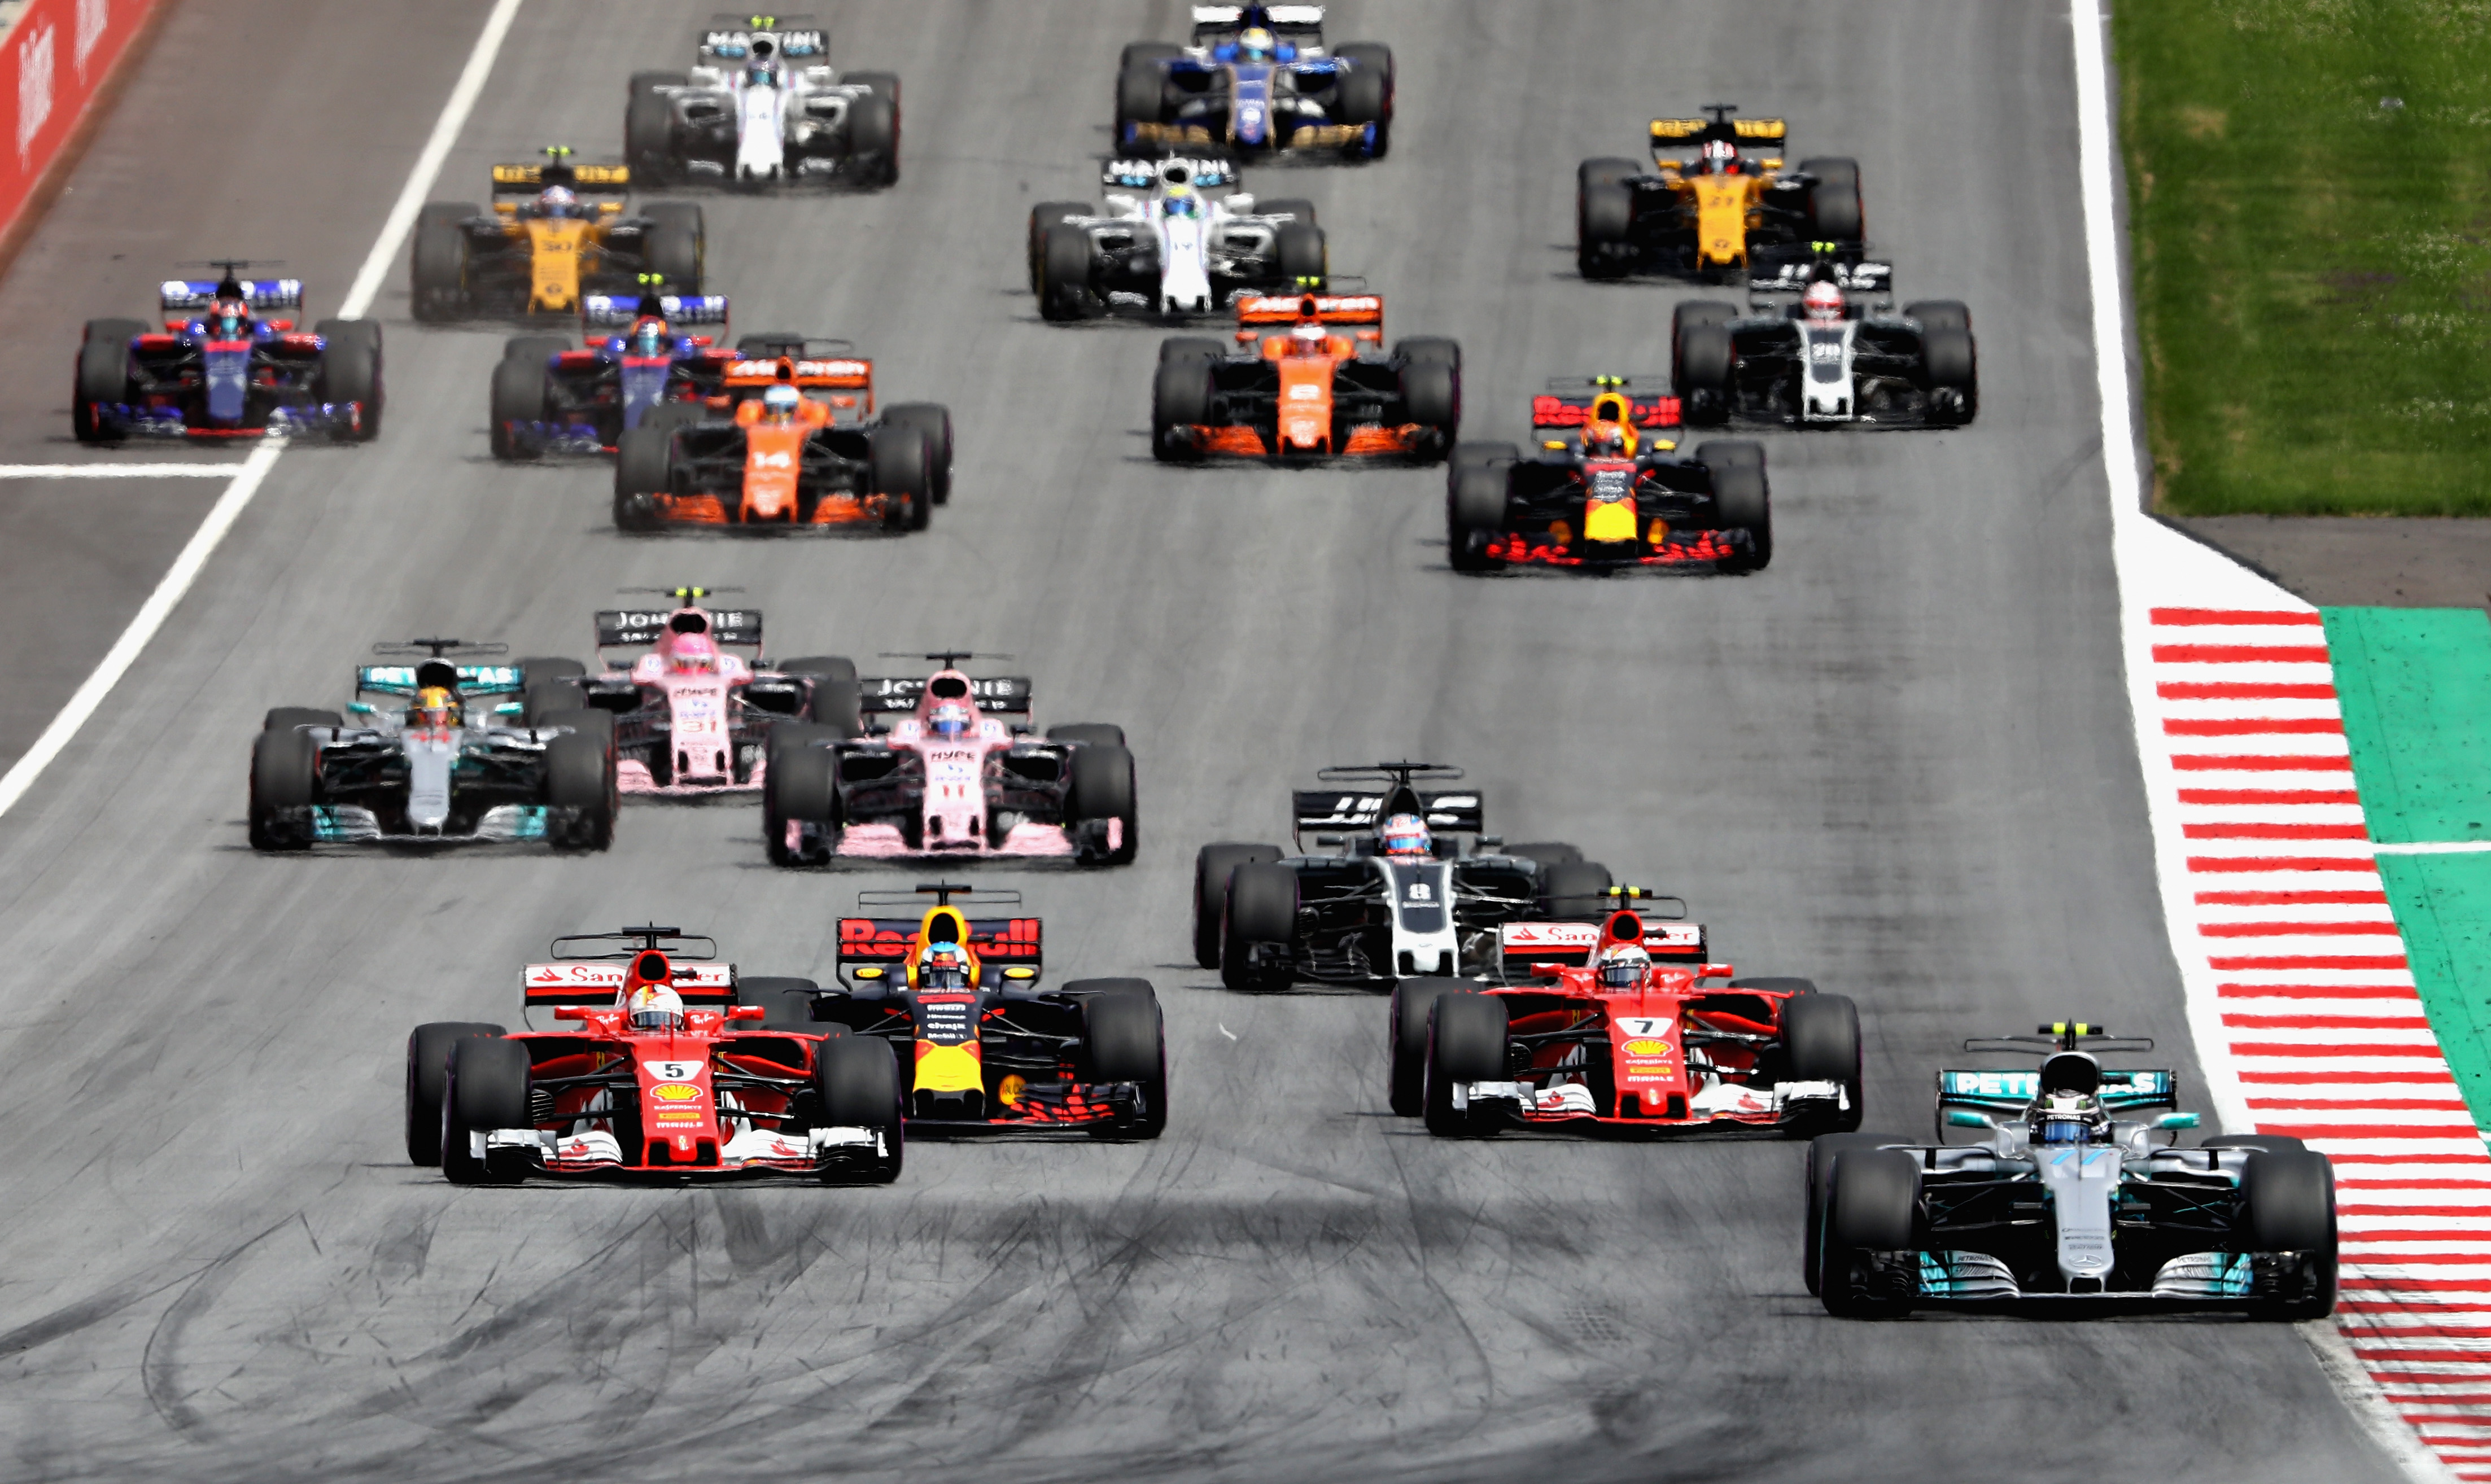 Bottas leads the field during the Austrian Grand Prix.